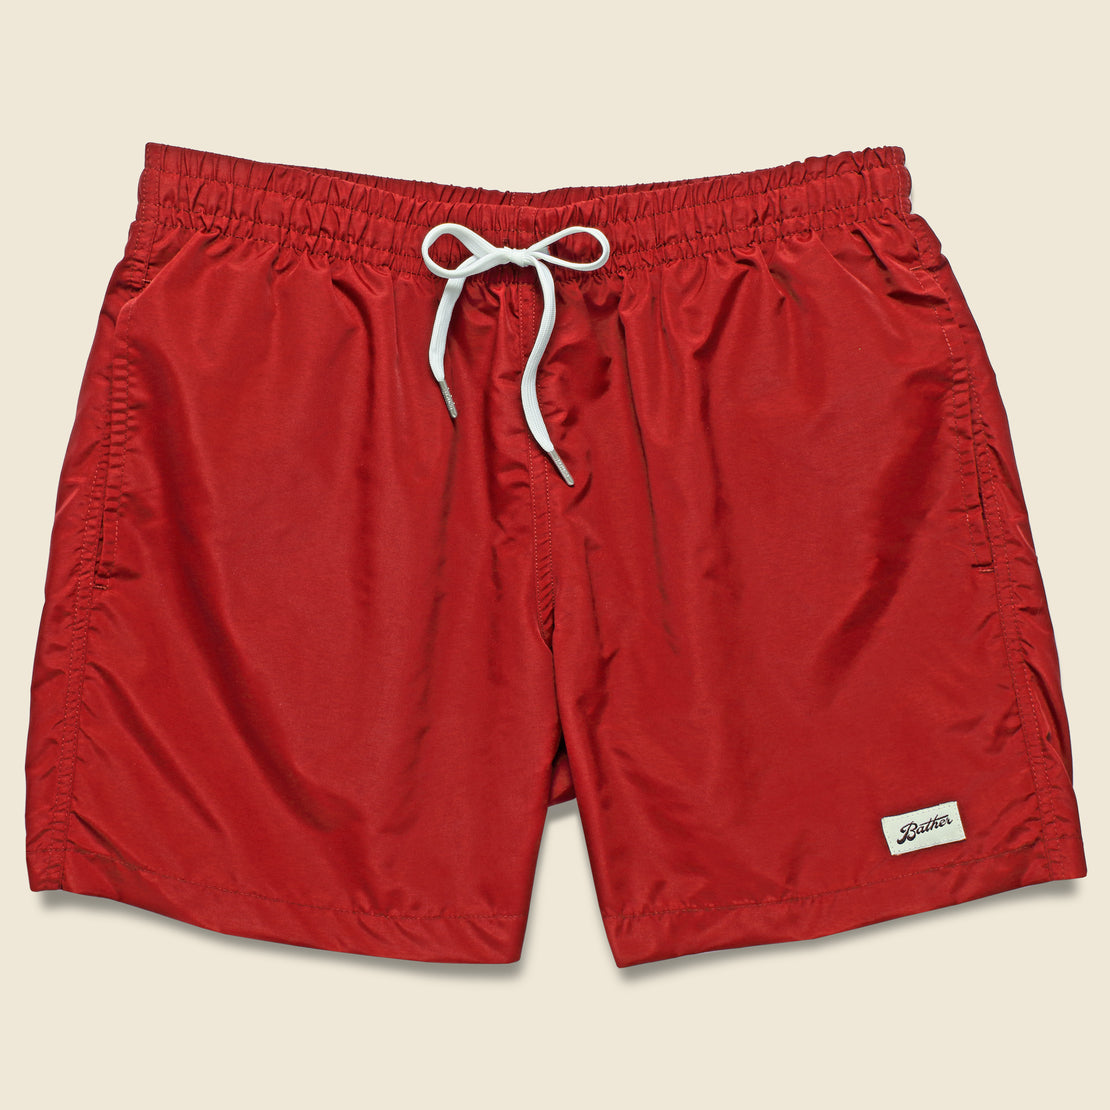 Bather Solid Swim Trunk - Red